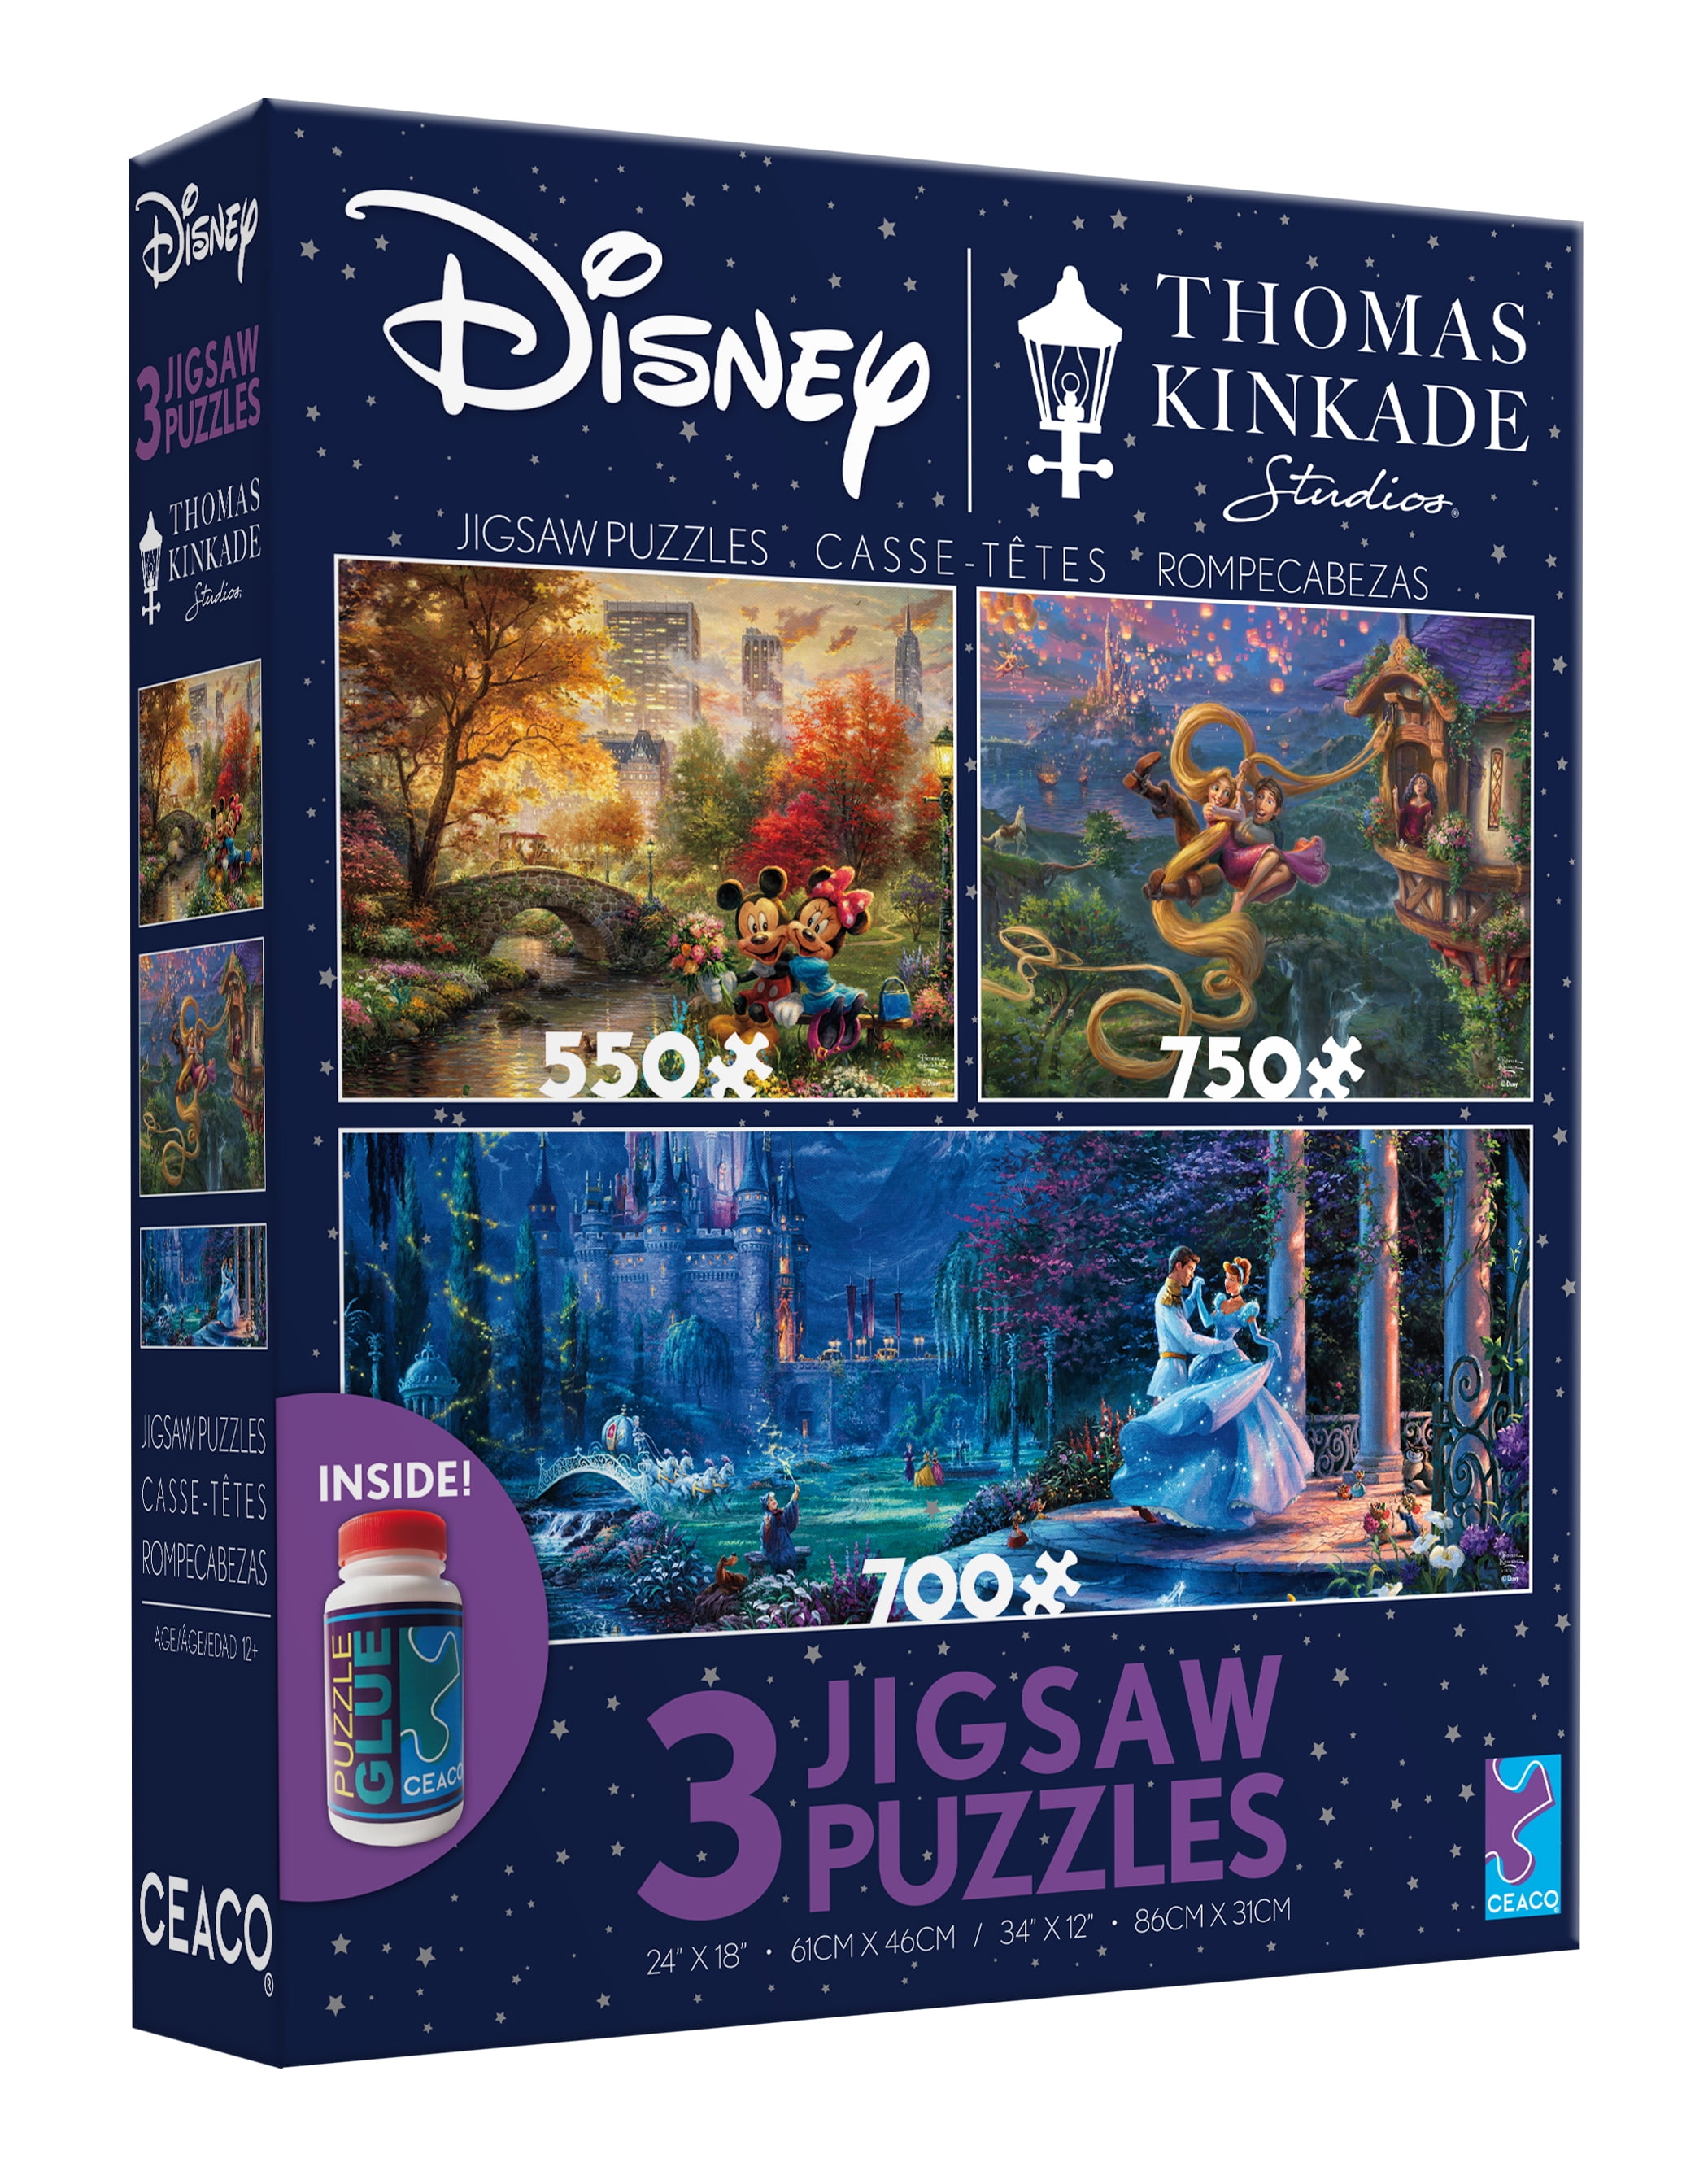 Thomas Kinkade The Valley of Peace Jigsaw Puzzle 700 PC Panoramic Ceaco for sale online 